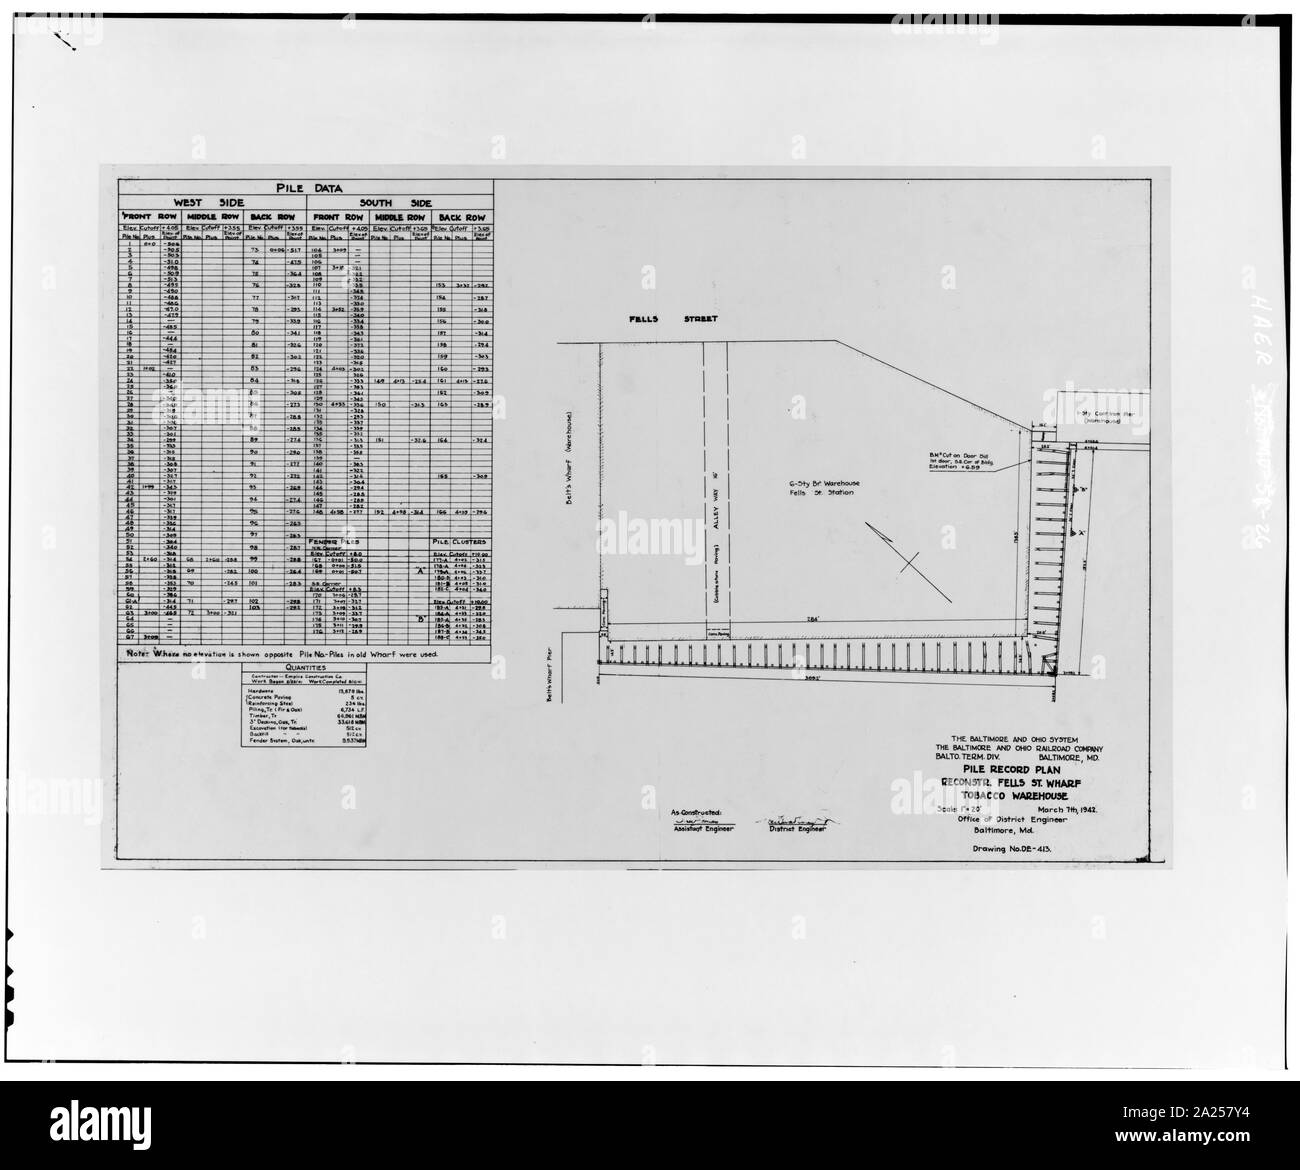 Photocopy of drawing, Baltimore and Ohio Railroad, District Engineer's Office, 1942 PILE RECORD PLAN, RECONSTRUCTION OF FELLS STREET WHARF, TOBACCO WAREHOUSE - Baltimore and Ohio Railroad, Tobacco Warehouse, 1000-1001 Fell Street, Baltimore, Independent City, MD; Henderson, James A; Yearby, Jean P; Schamp, J. Brough; Stock Photo